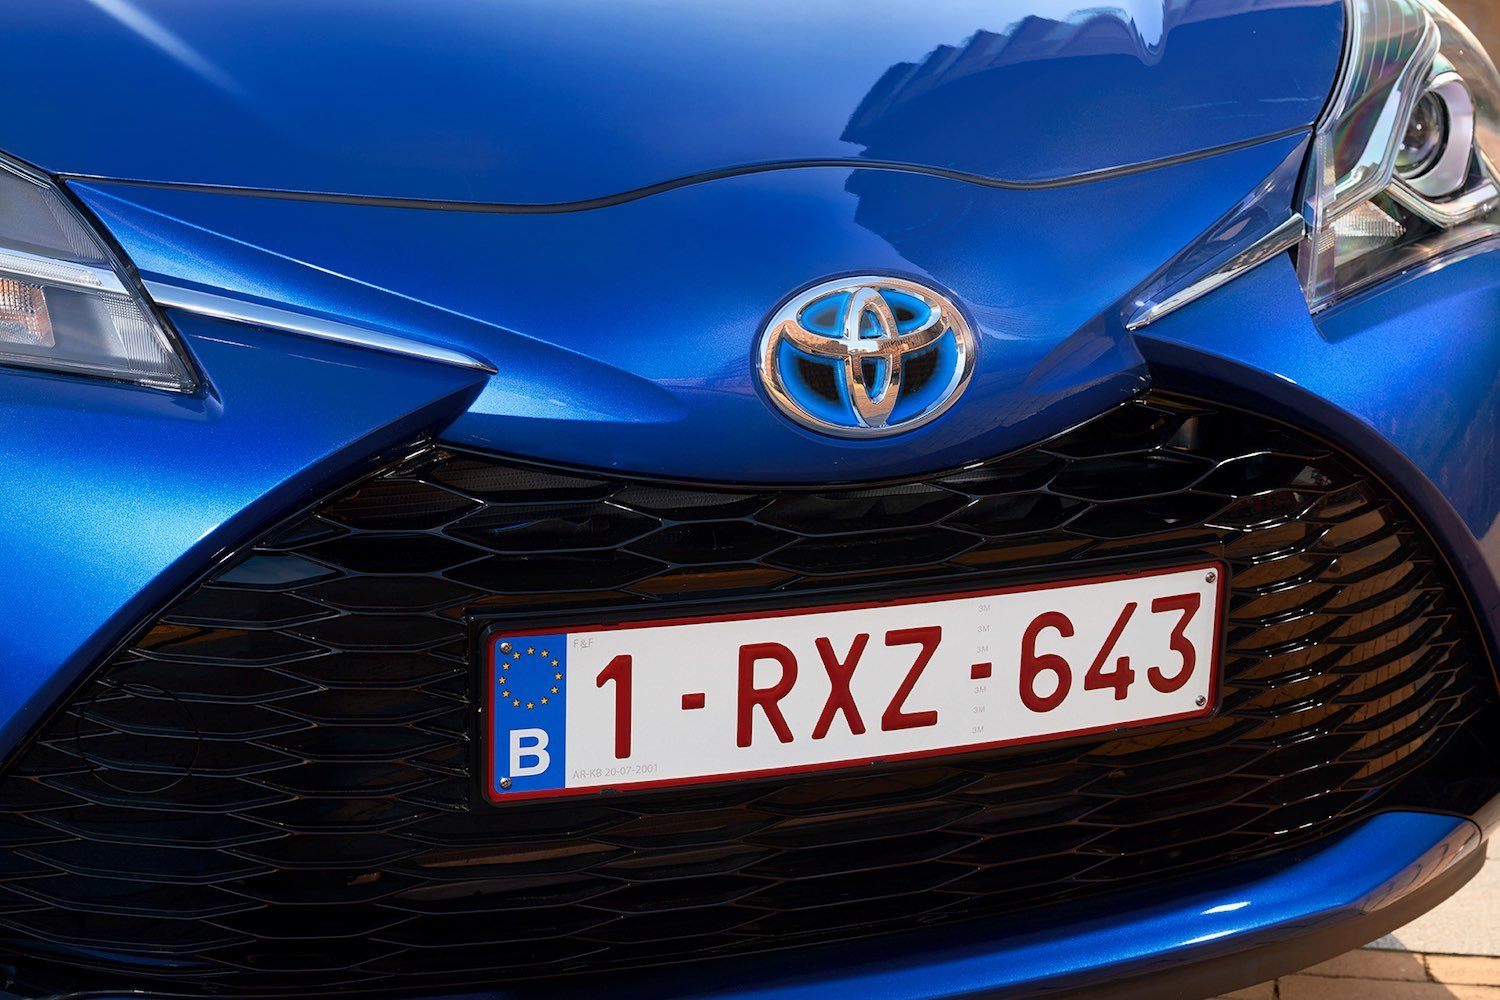 Tim Barnes-Clay drives the New Toyota Yaris car review by Drive 2